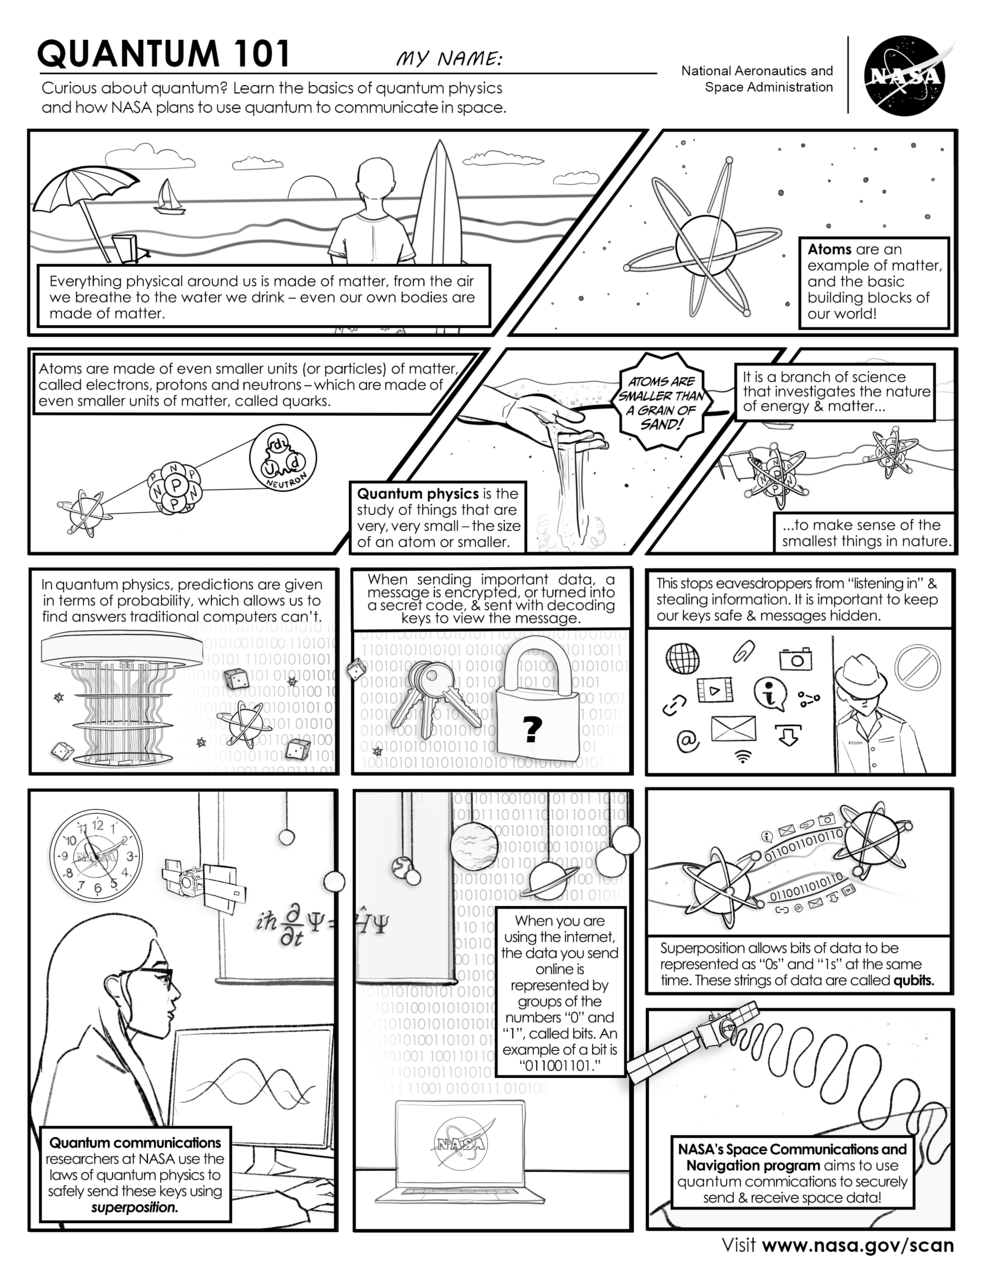 Black and white comic with 12 story blocks depicting quantum science. The title "Quantum 101" is at the top, followed by a description: "Curious about quantum? Learn the basic of quantum physics and how NASA plans to use quantum to communicate in space."